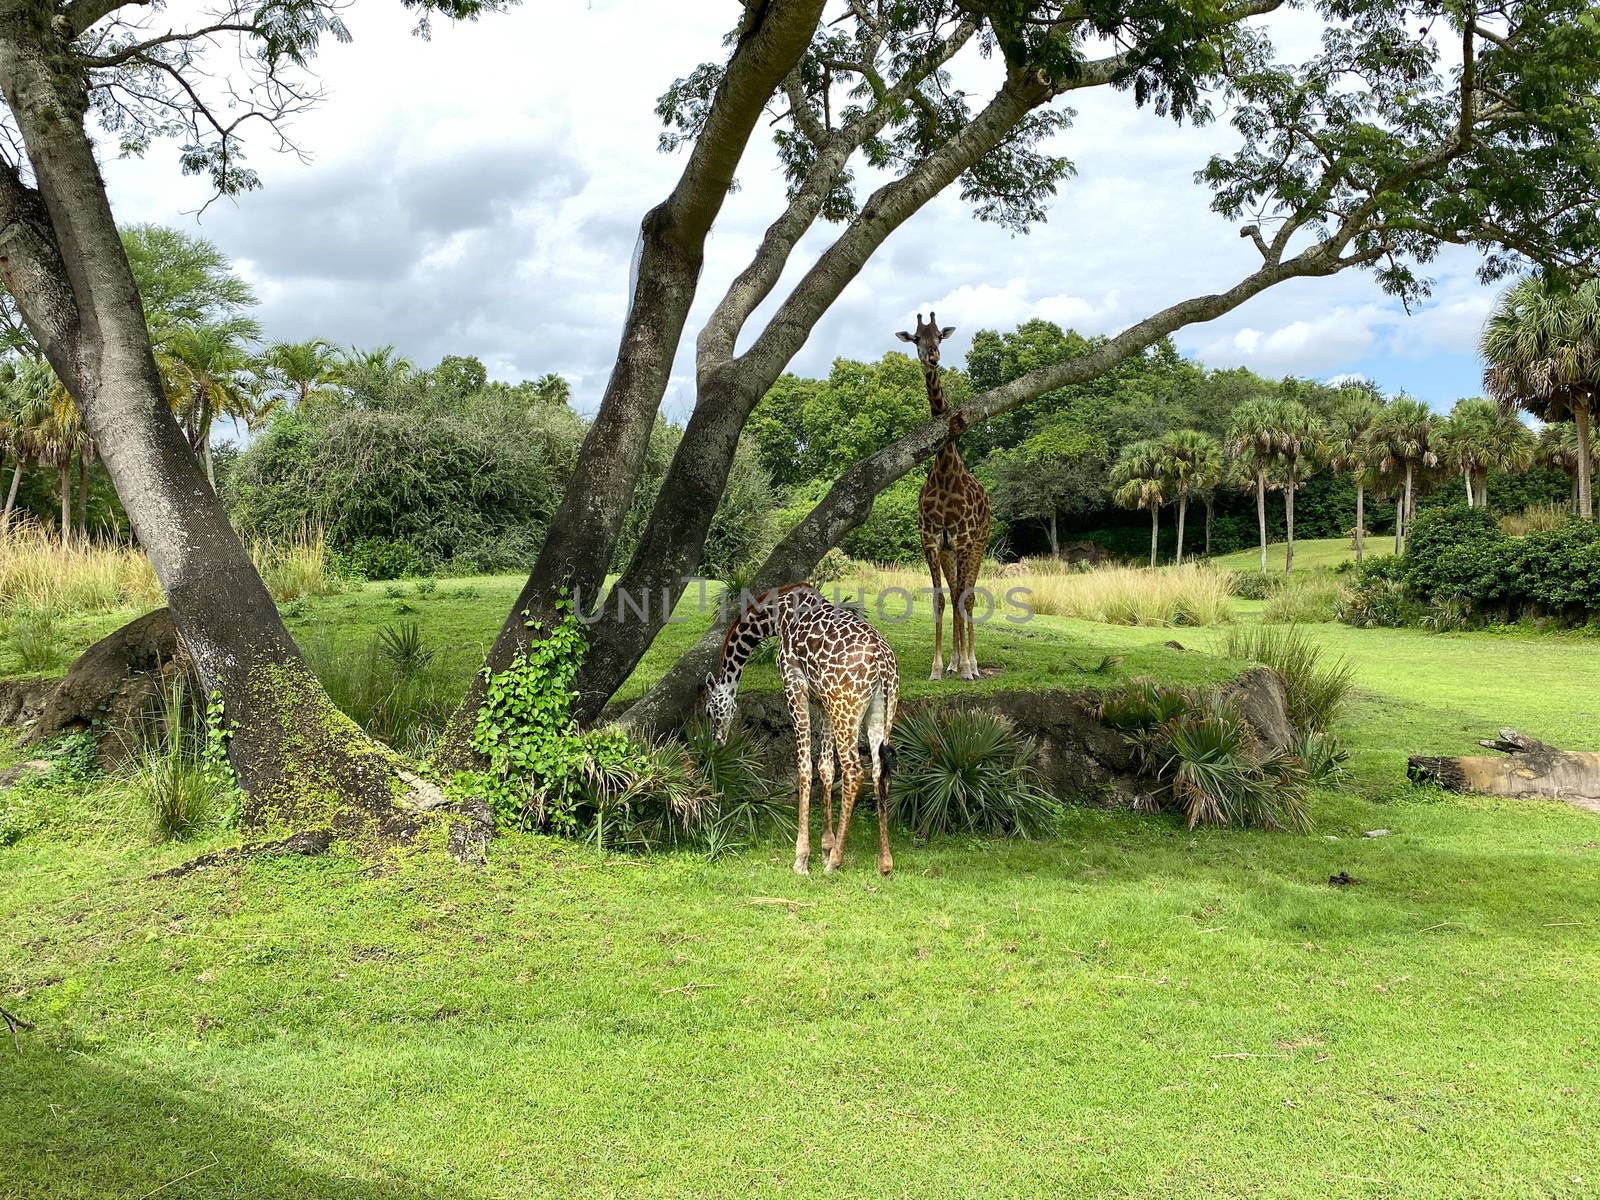 A tower of Giraffes grazing on trees on a savannah at a zoo on a bright sunny day.